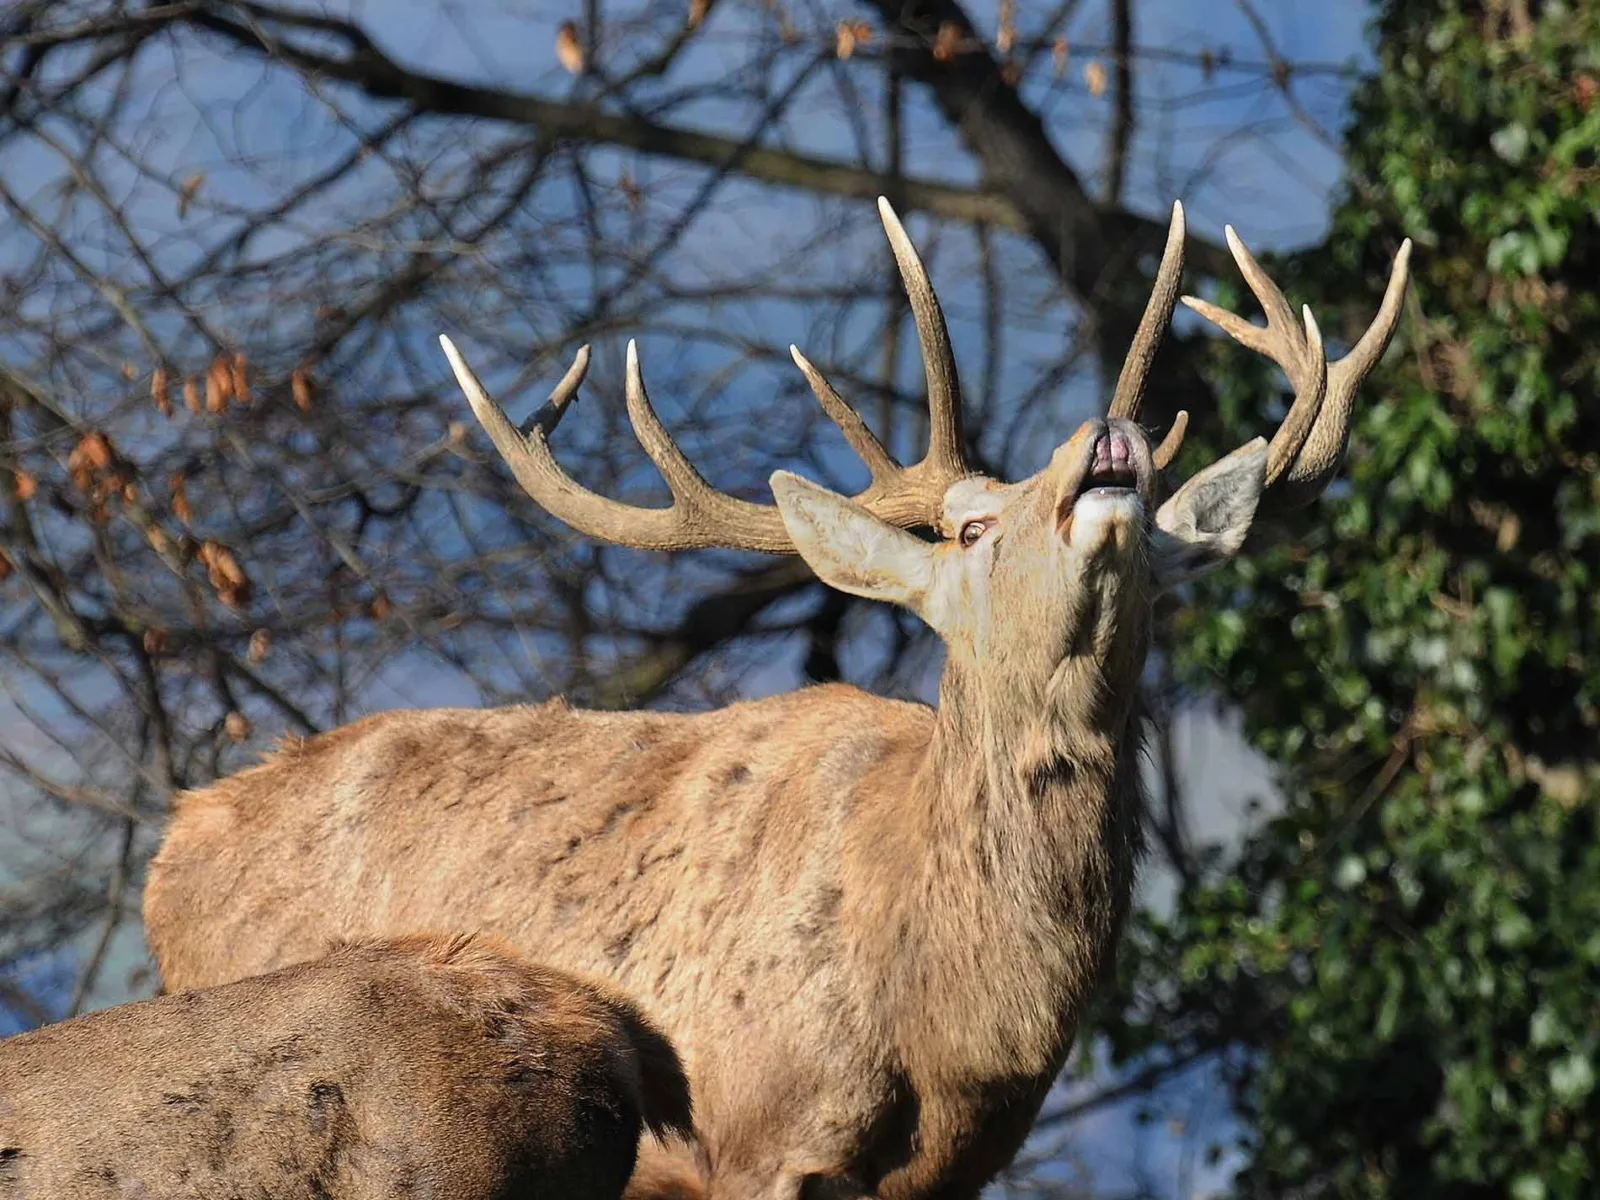 A red deer holding its head up and pulling its front lip upwards.